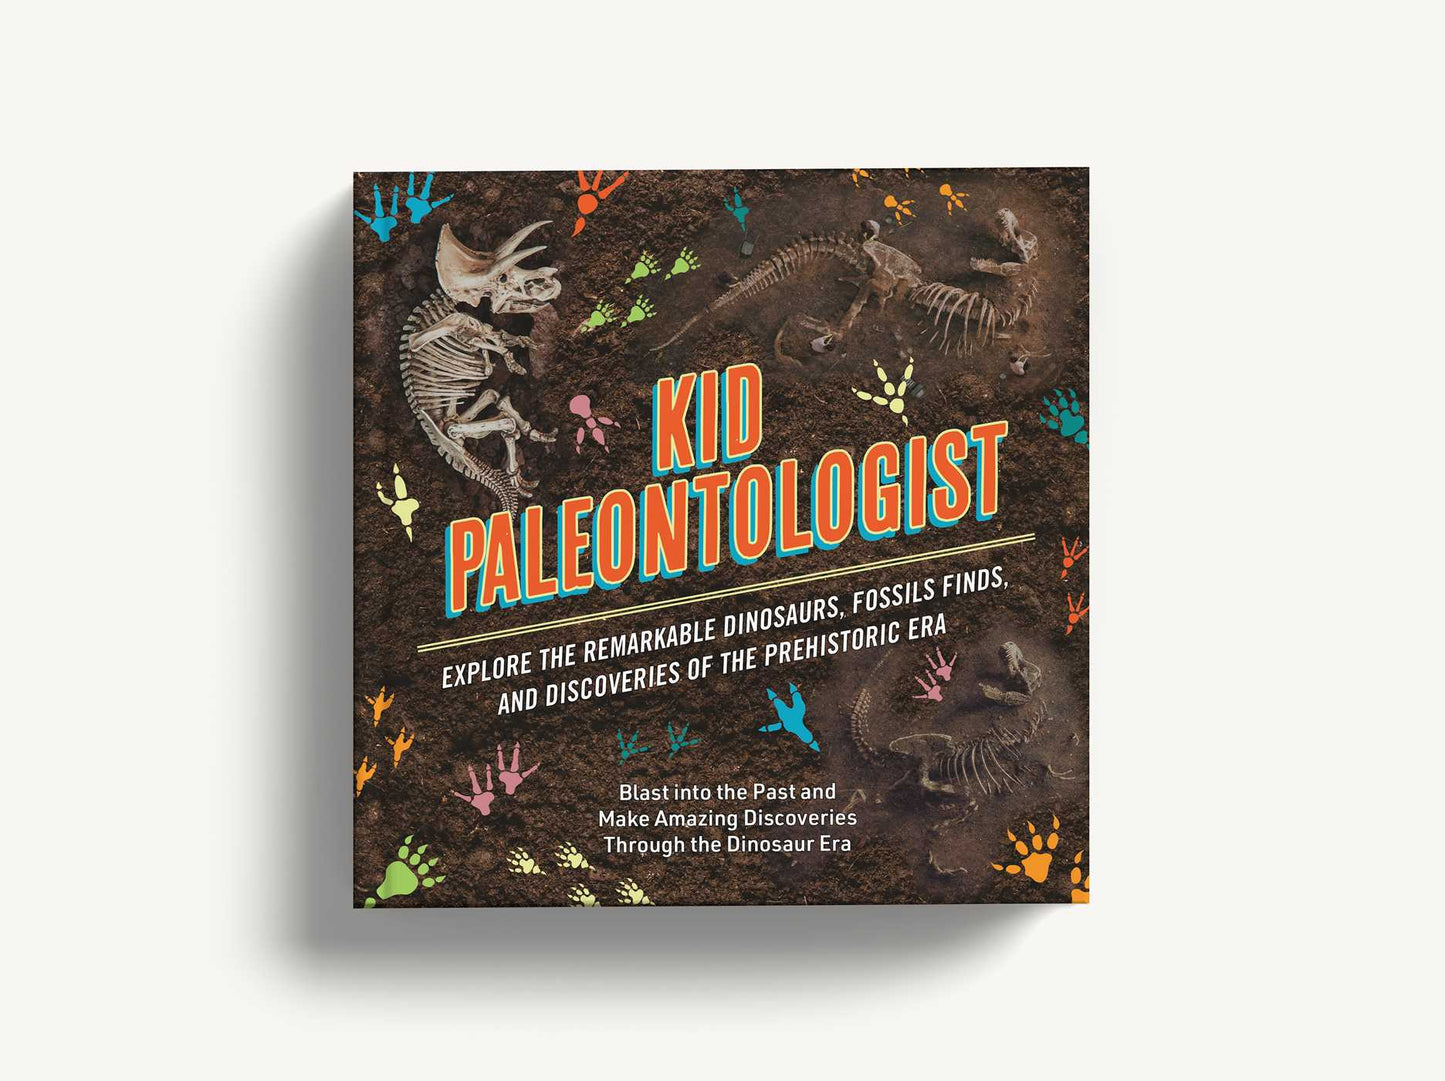 Kid Paleontologist: Explore the Remarkable Dinosaurs, Fossils Finds, and Discoveries of the Prehistoric Era